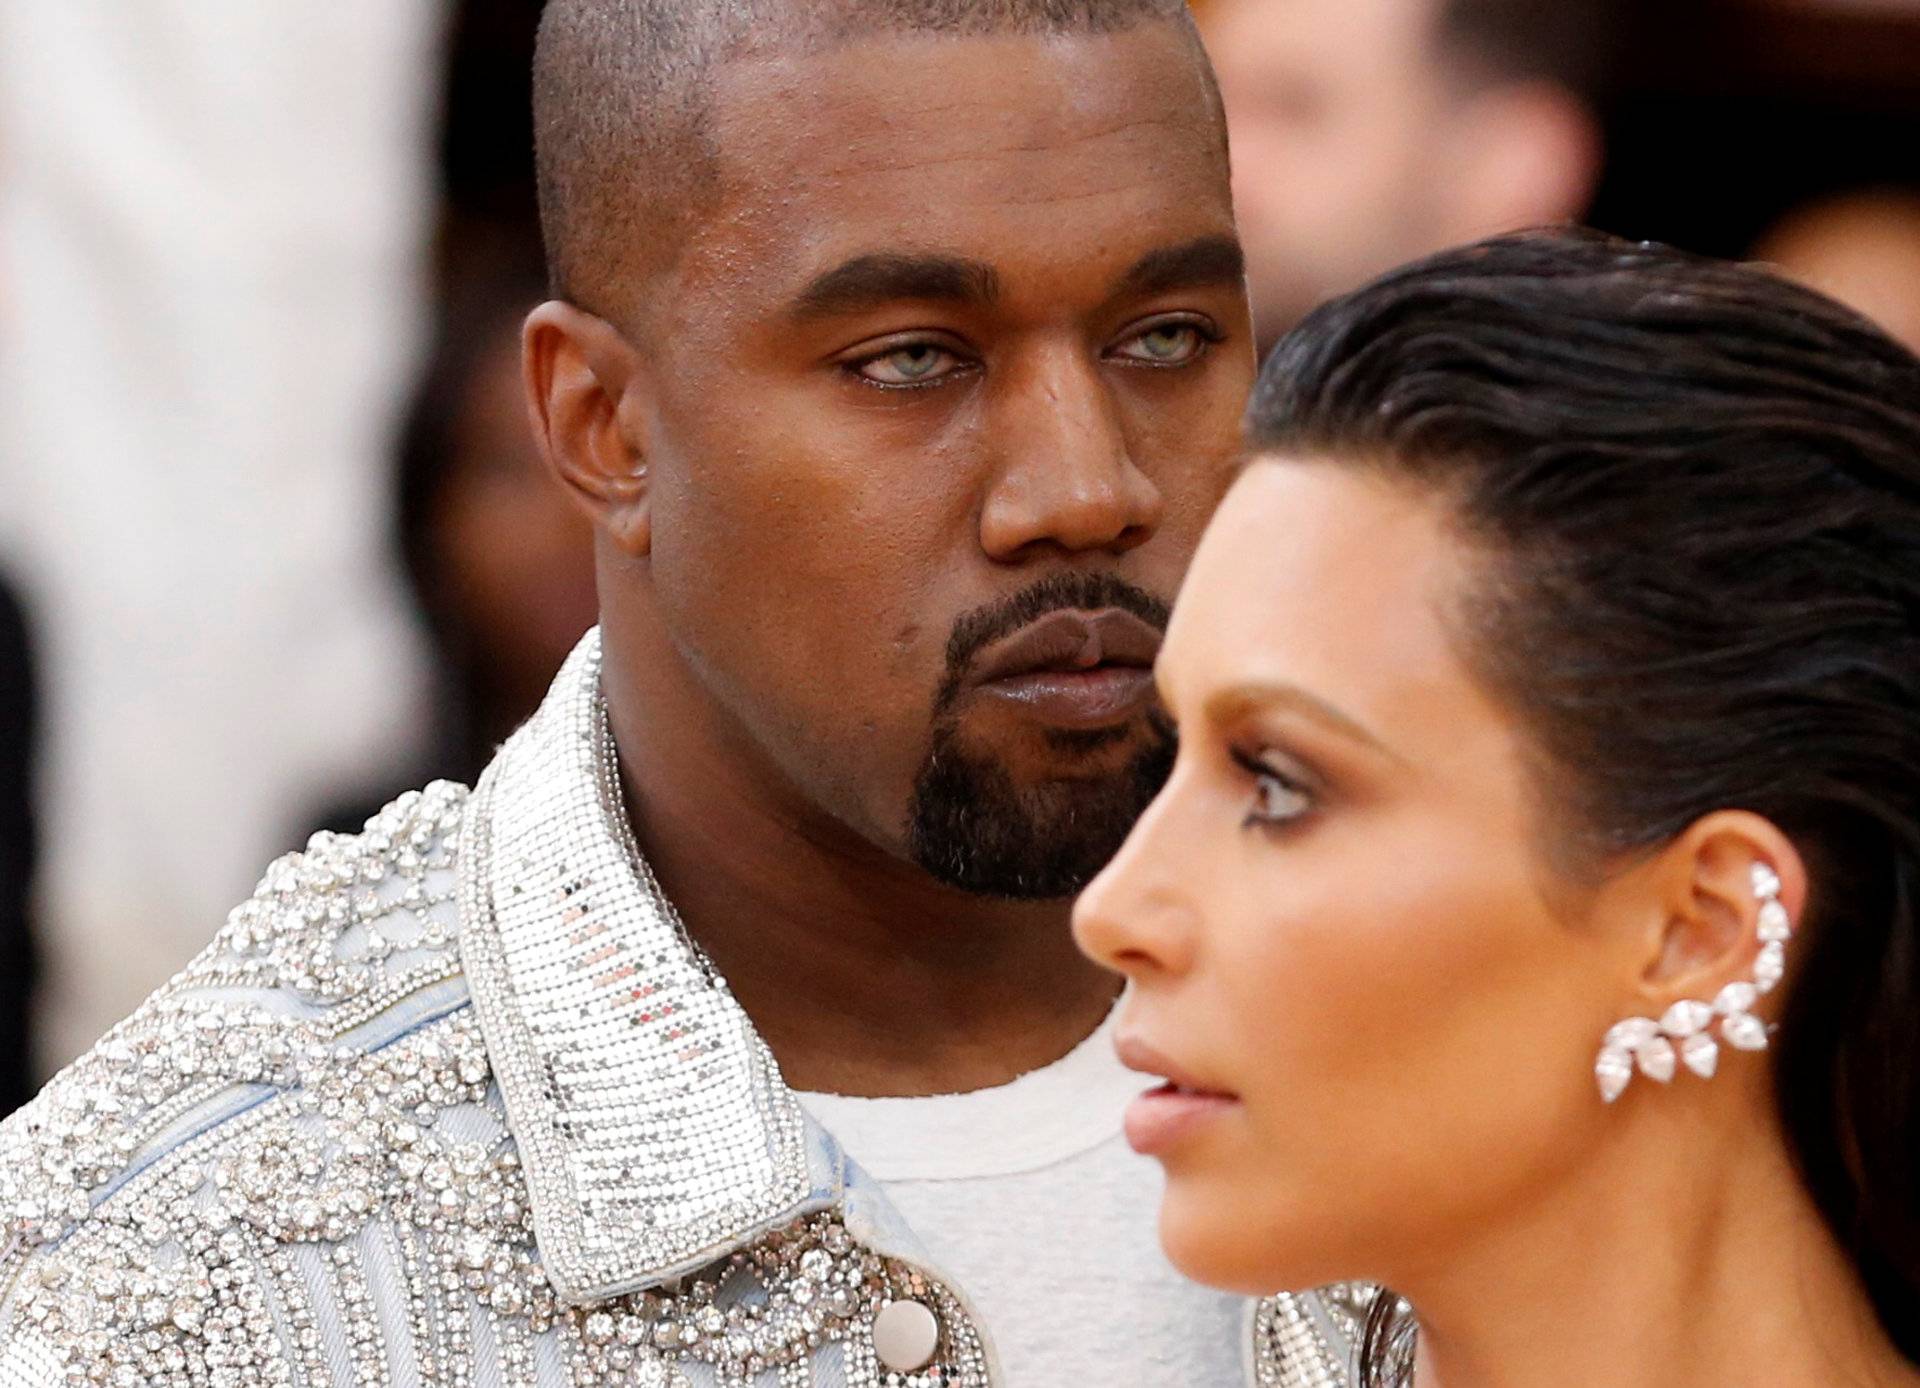 Musician Kanye West and wife Kim Kardashian arrive at the Met Gala in New York